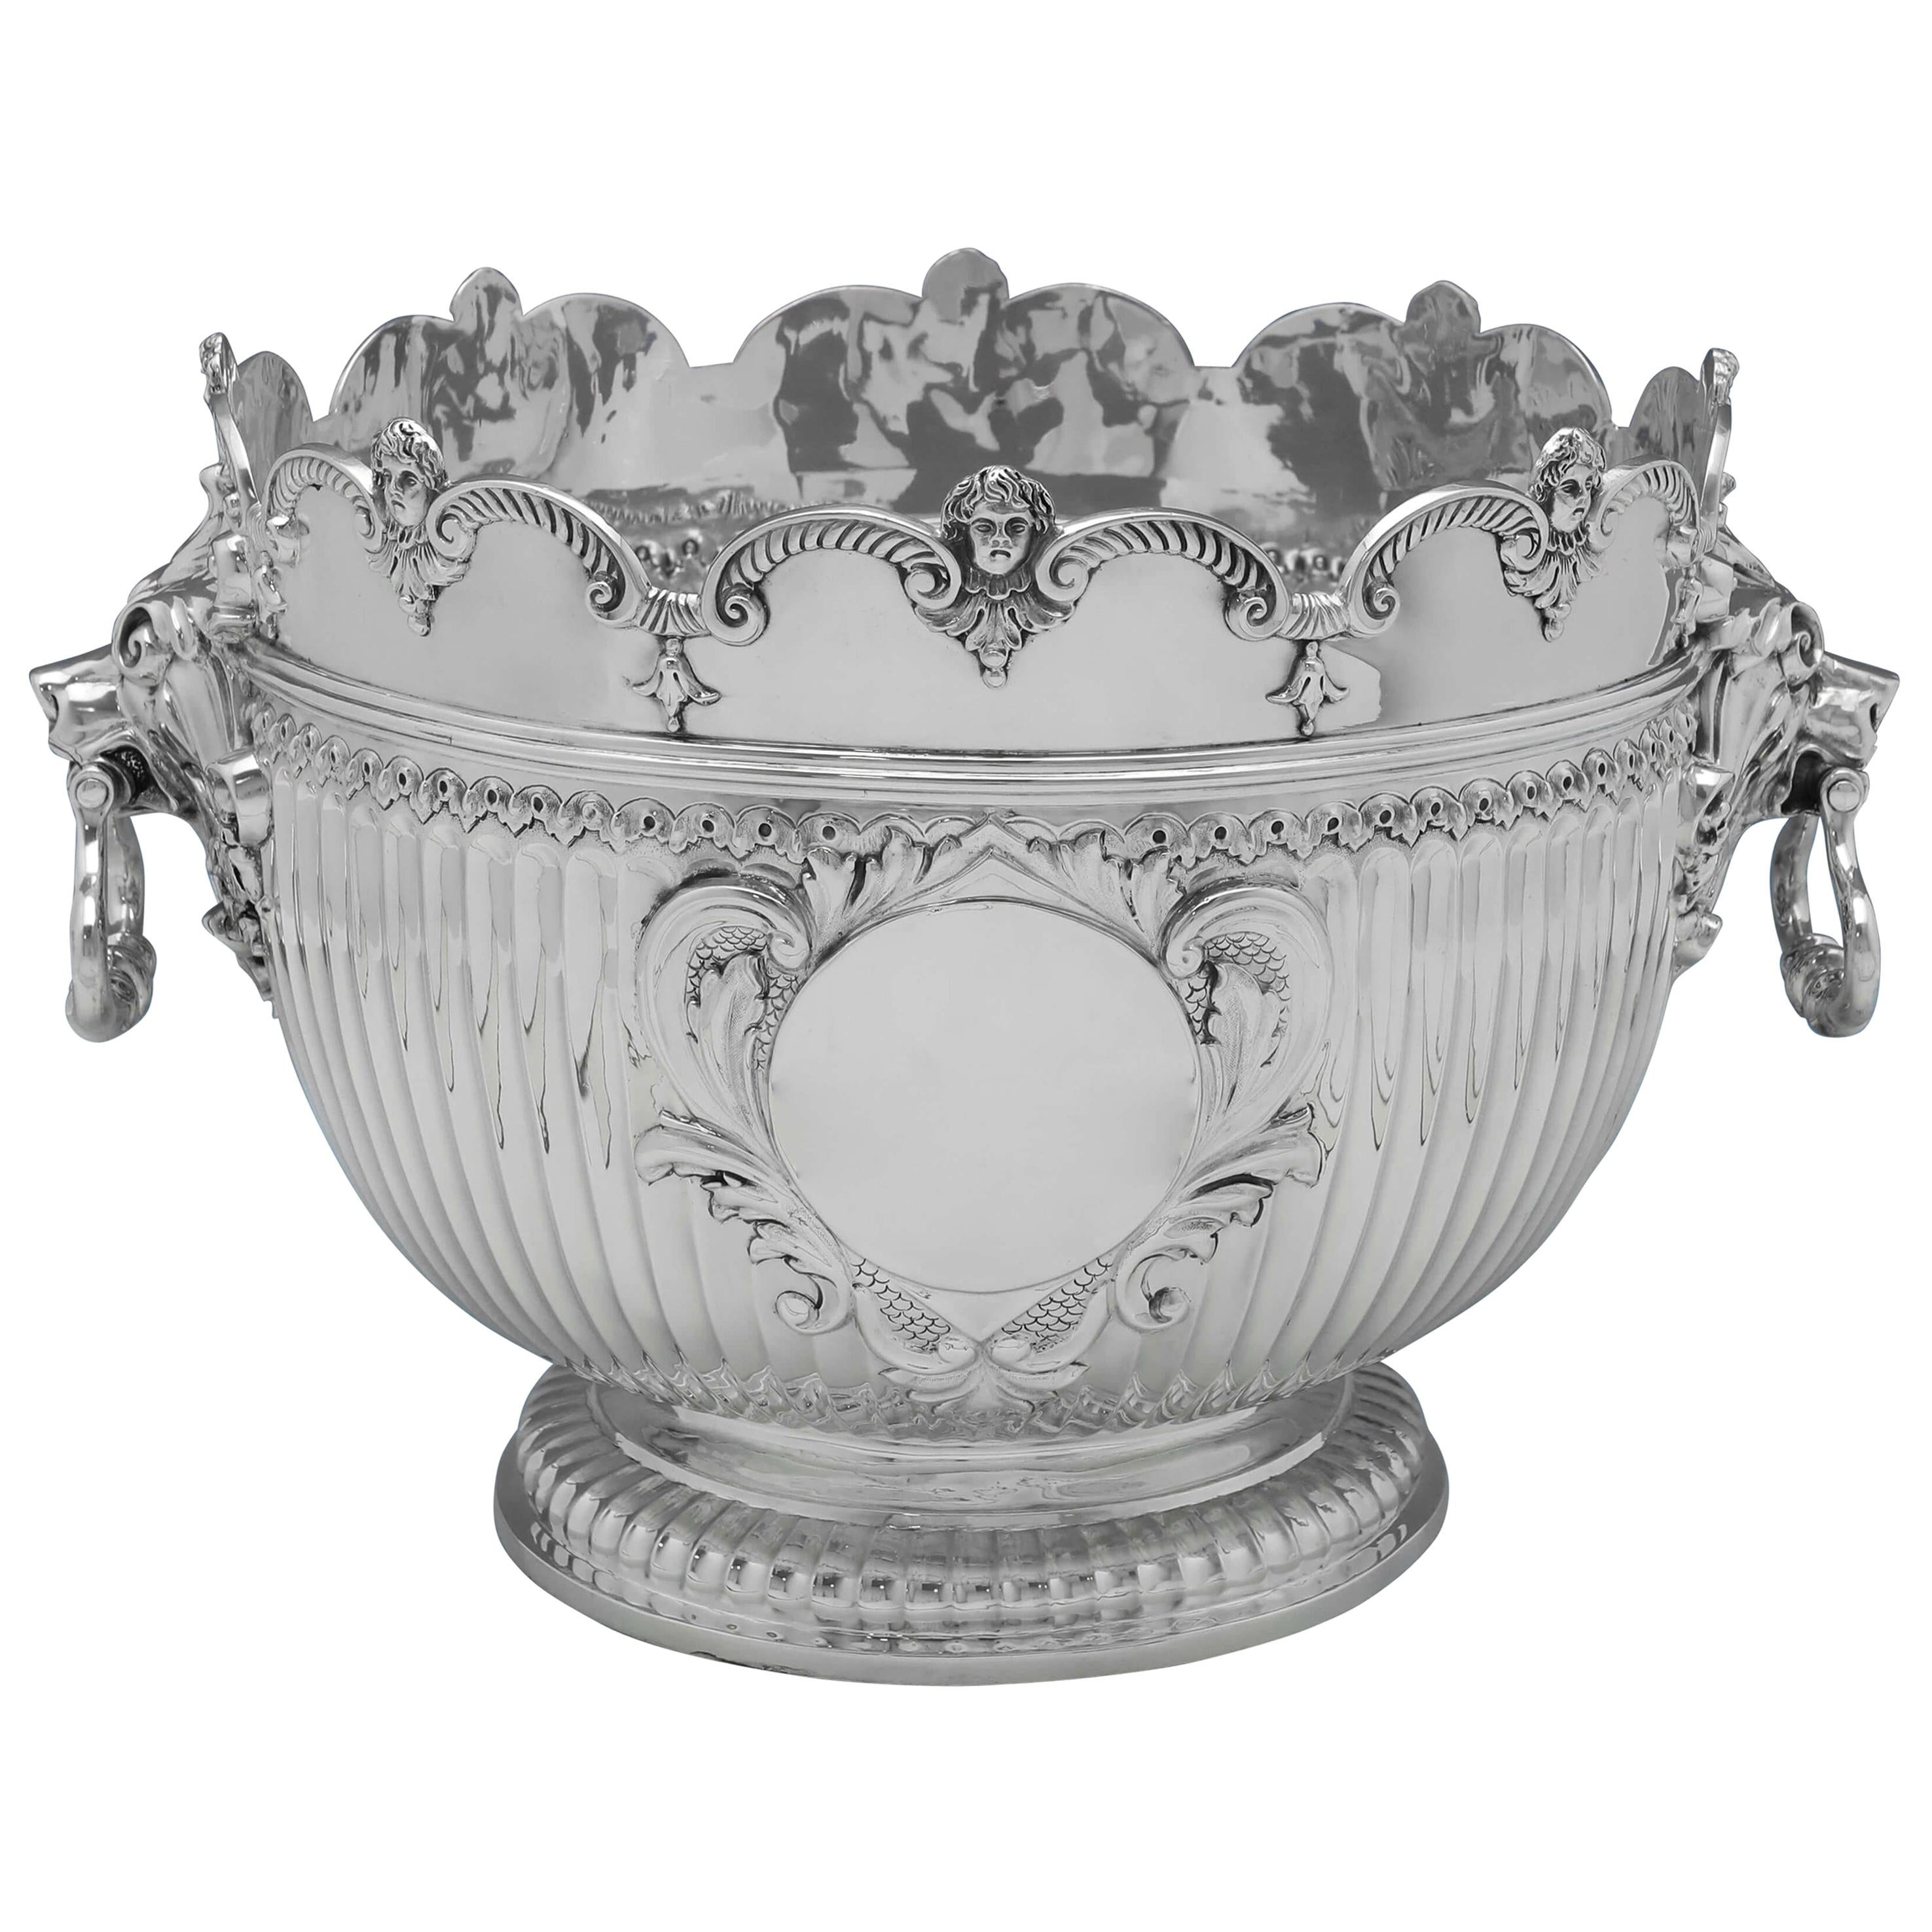 Edwardian Antique Sterling Silver Monteith Bowl by Carringtons, London, 1904